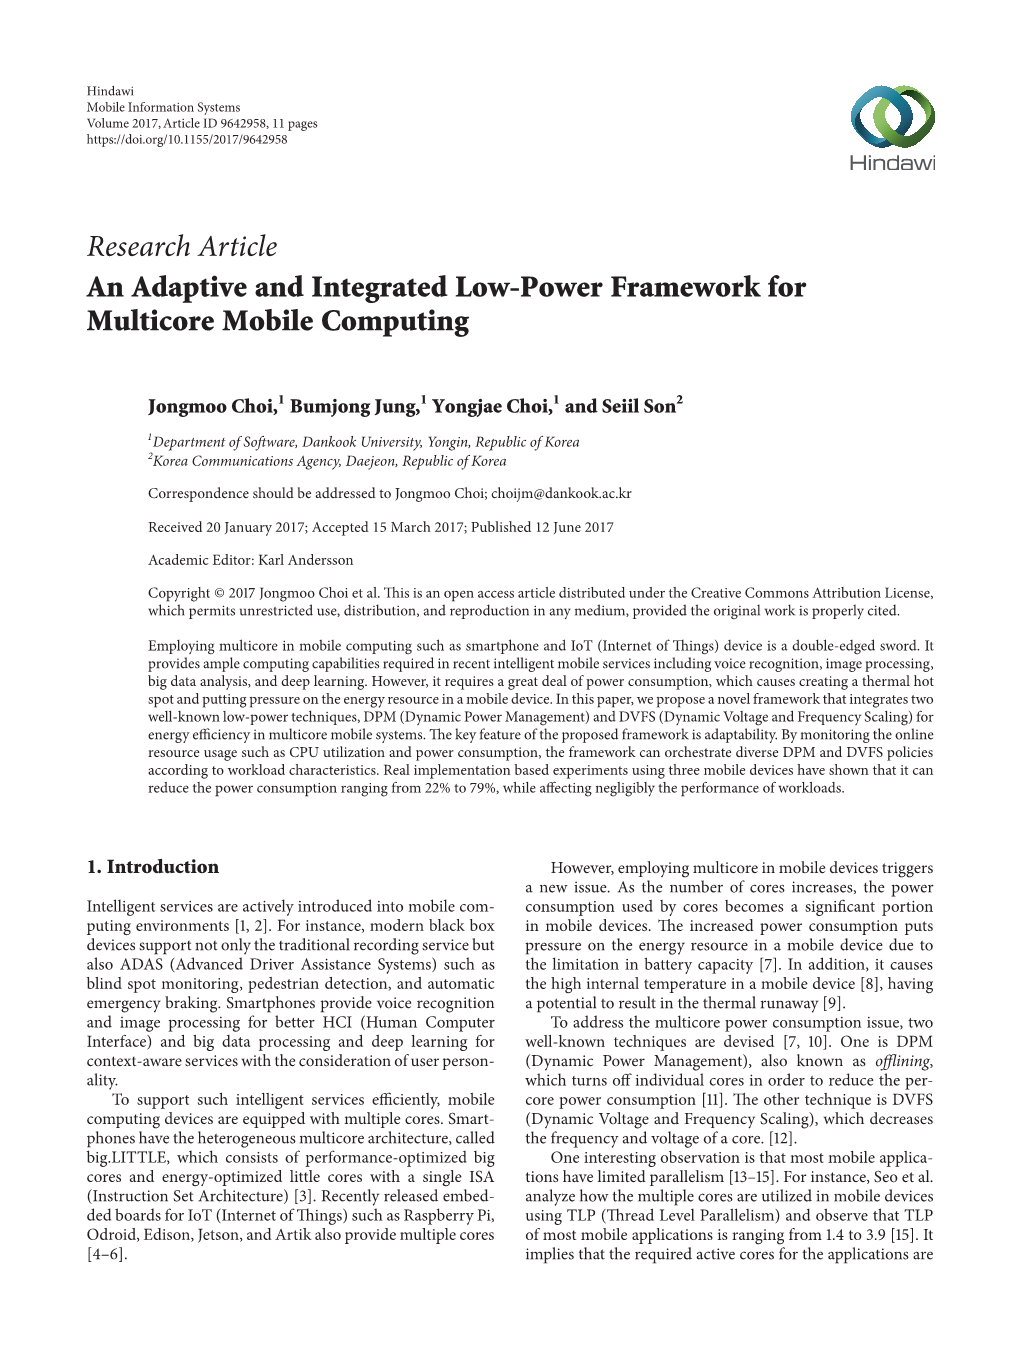 An Adaptive and Integrated Low-Power Framework for Multicore Mobile Computing